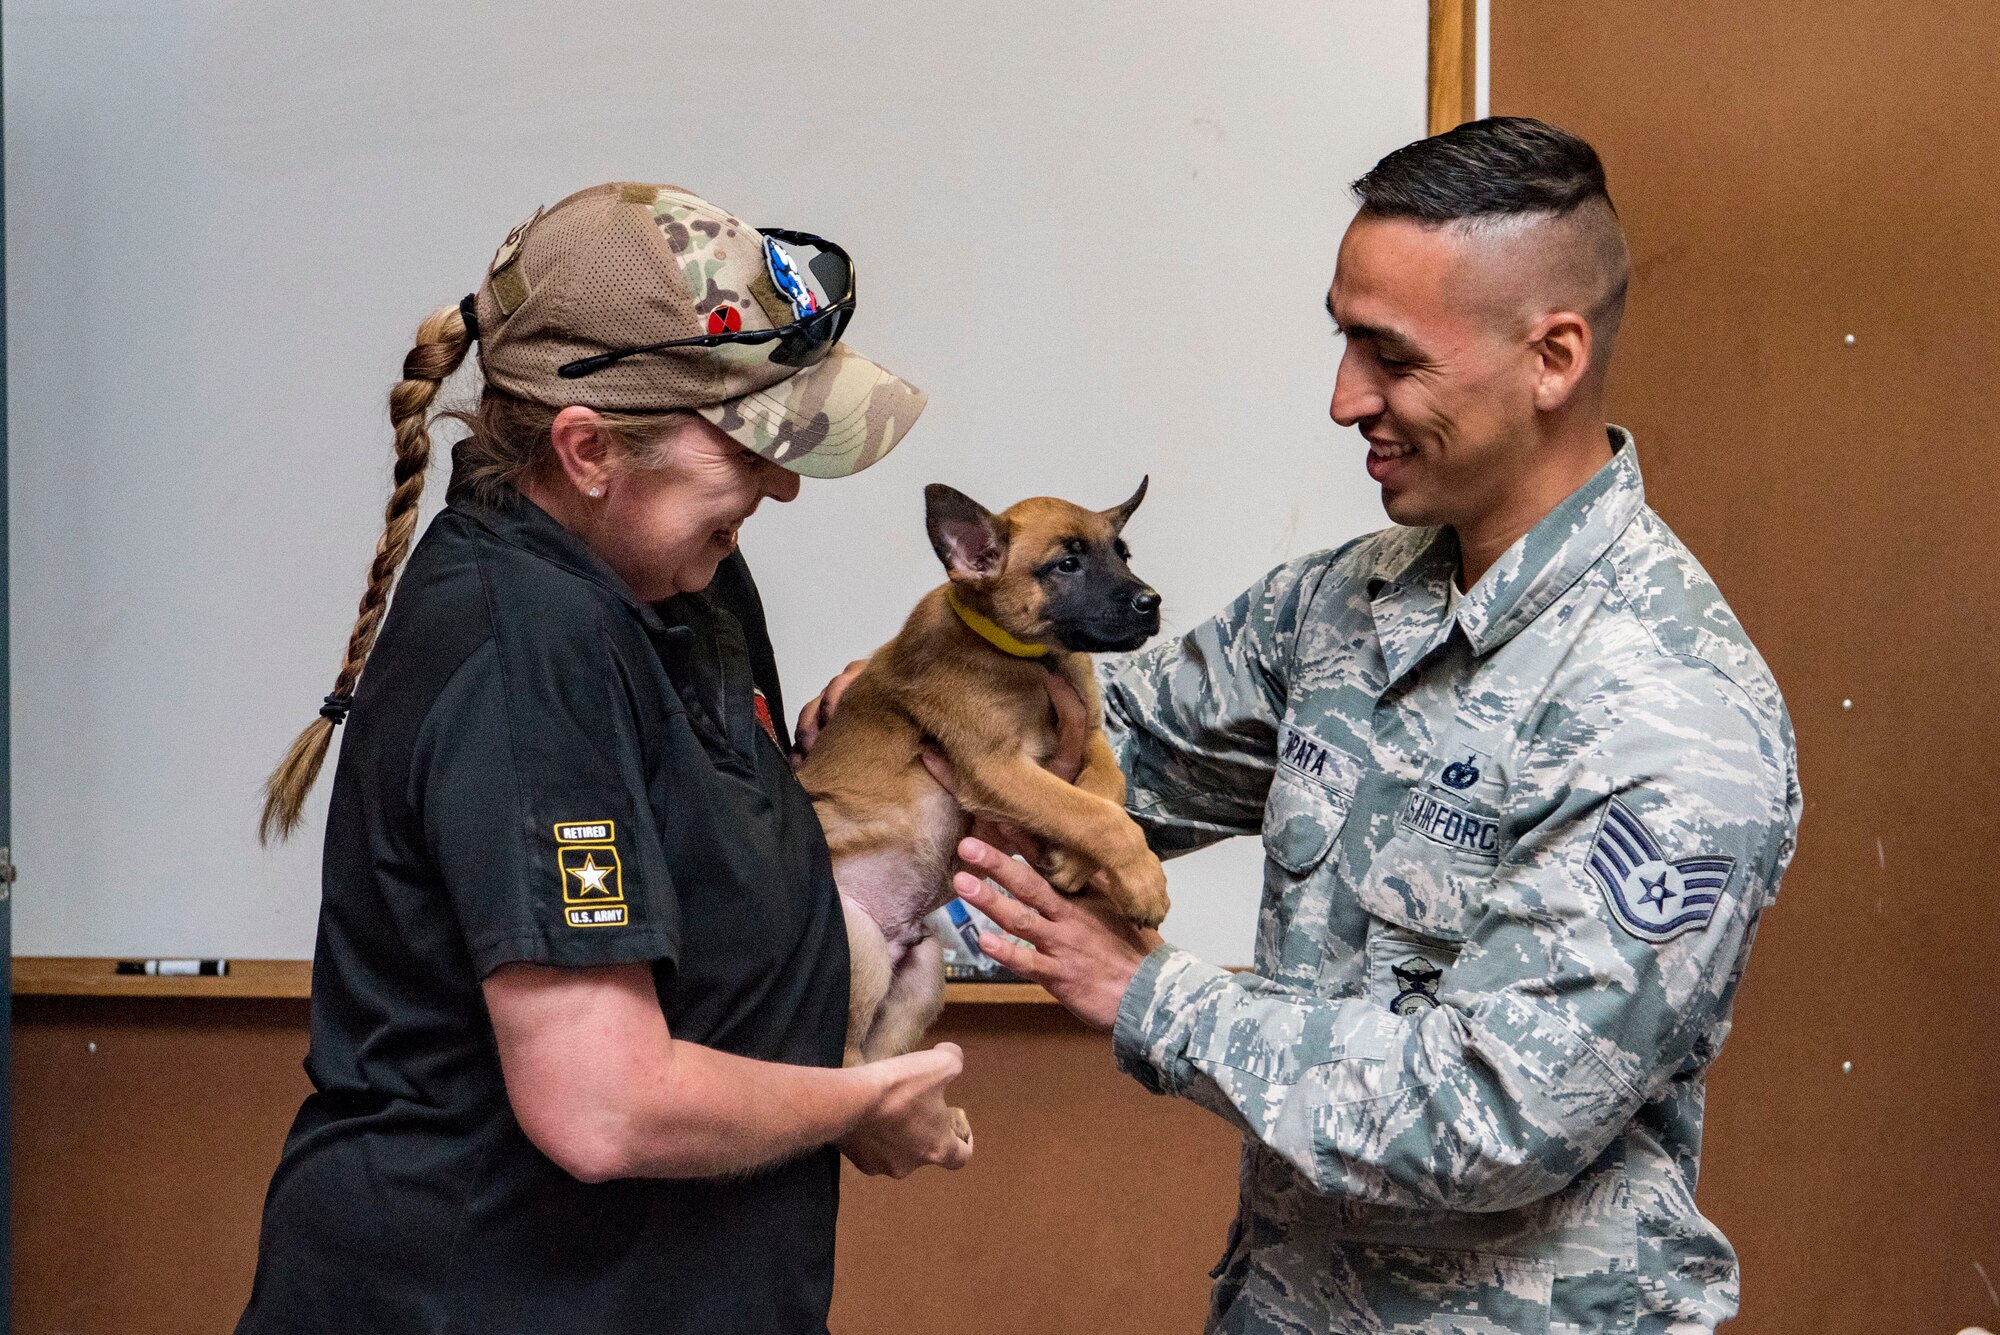 Regina Johnson, 341st Training Wing MWD breeding program foster consultant, hands a military working dog puppy to Staff Sgt. Carlos Zapata, 341st Training Squadron logistics NCO, April 26, 2019, at Joint Base San Antonio-Lackland, Texas. The Joint Base San Antonio military working dog foster puppy program places fosters with four-legged future warriors for six months before they enter the next phase of specialized training.